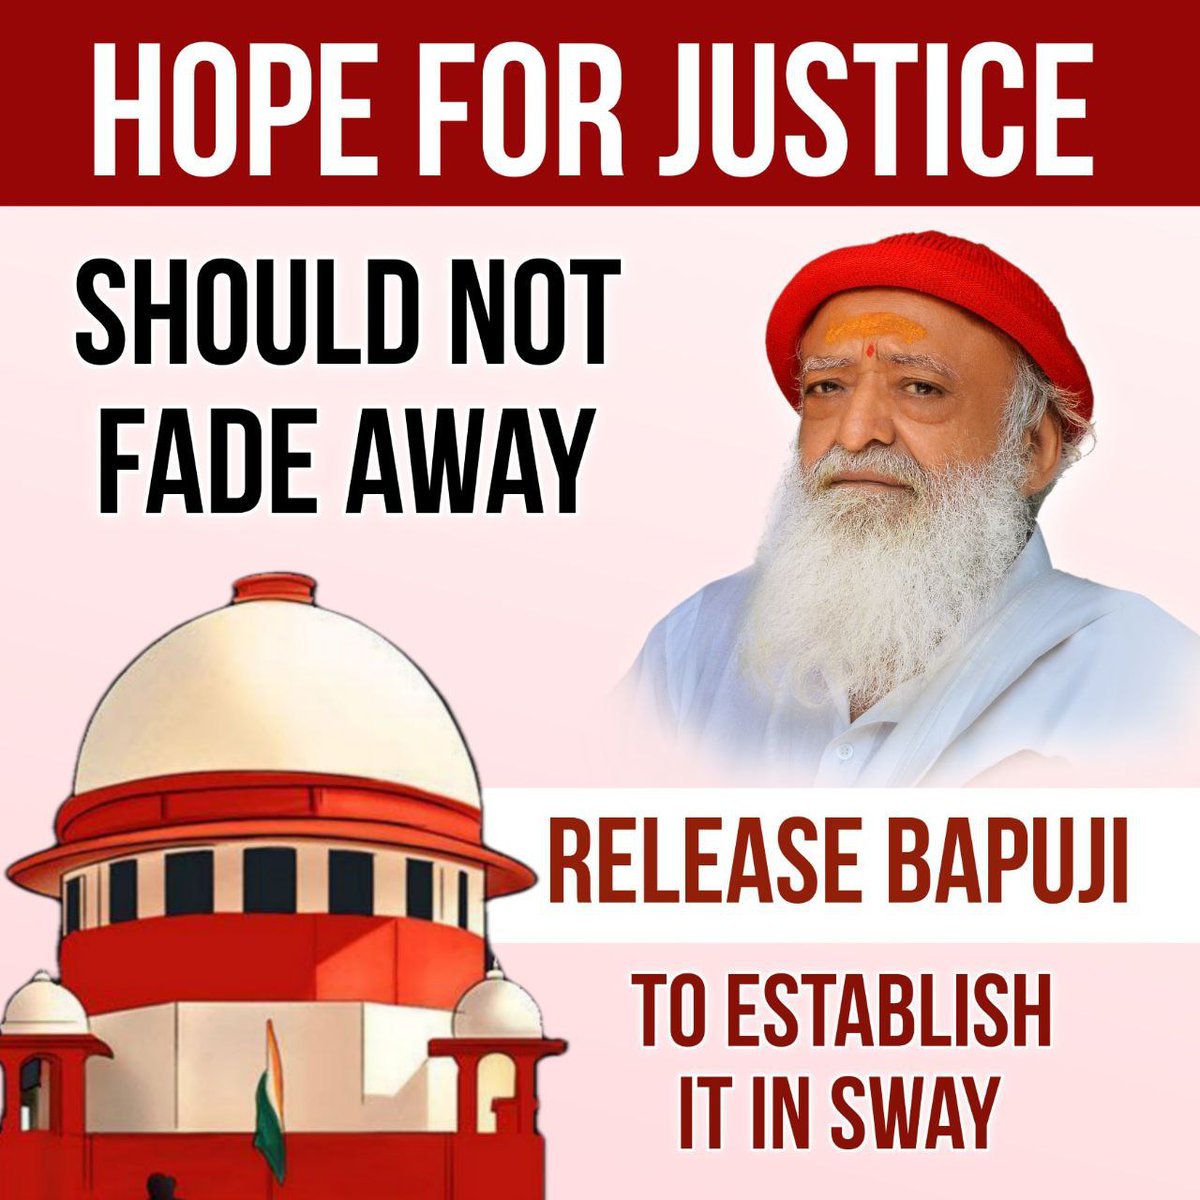 The persecution faced by d Sanatan Rakshak Sant Shri Asharamji Bapu makes it clear that there is a system of governance & justice being run based on d whims of those who seek to destroy Sanatan principles. Now, d demand of the people is #EnoughIsEnough to swiftly release #Bapuji